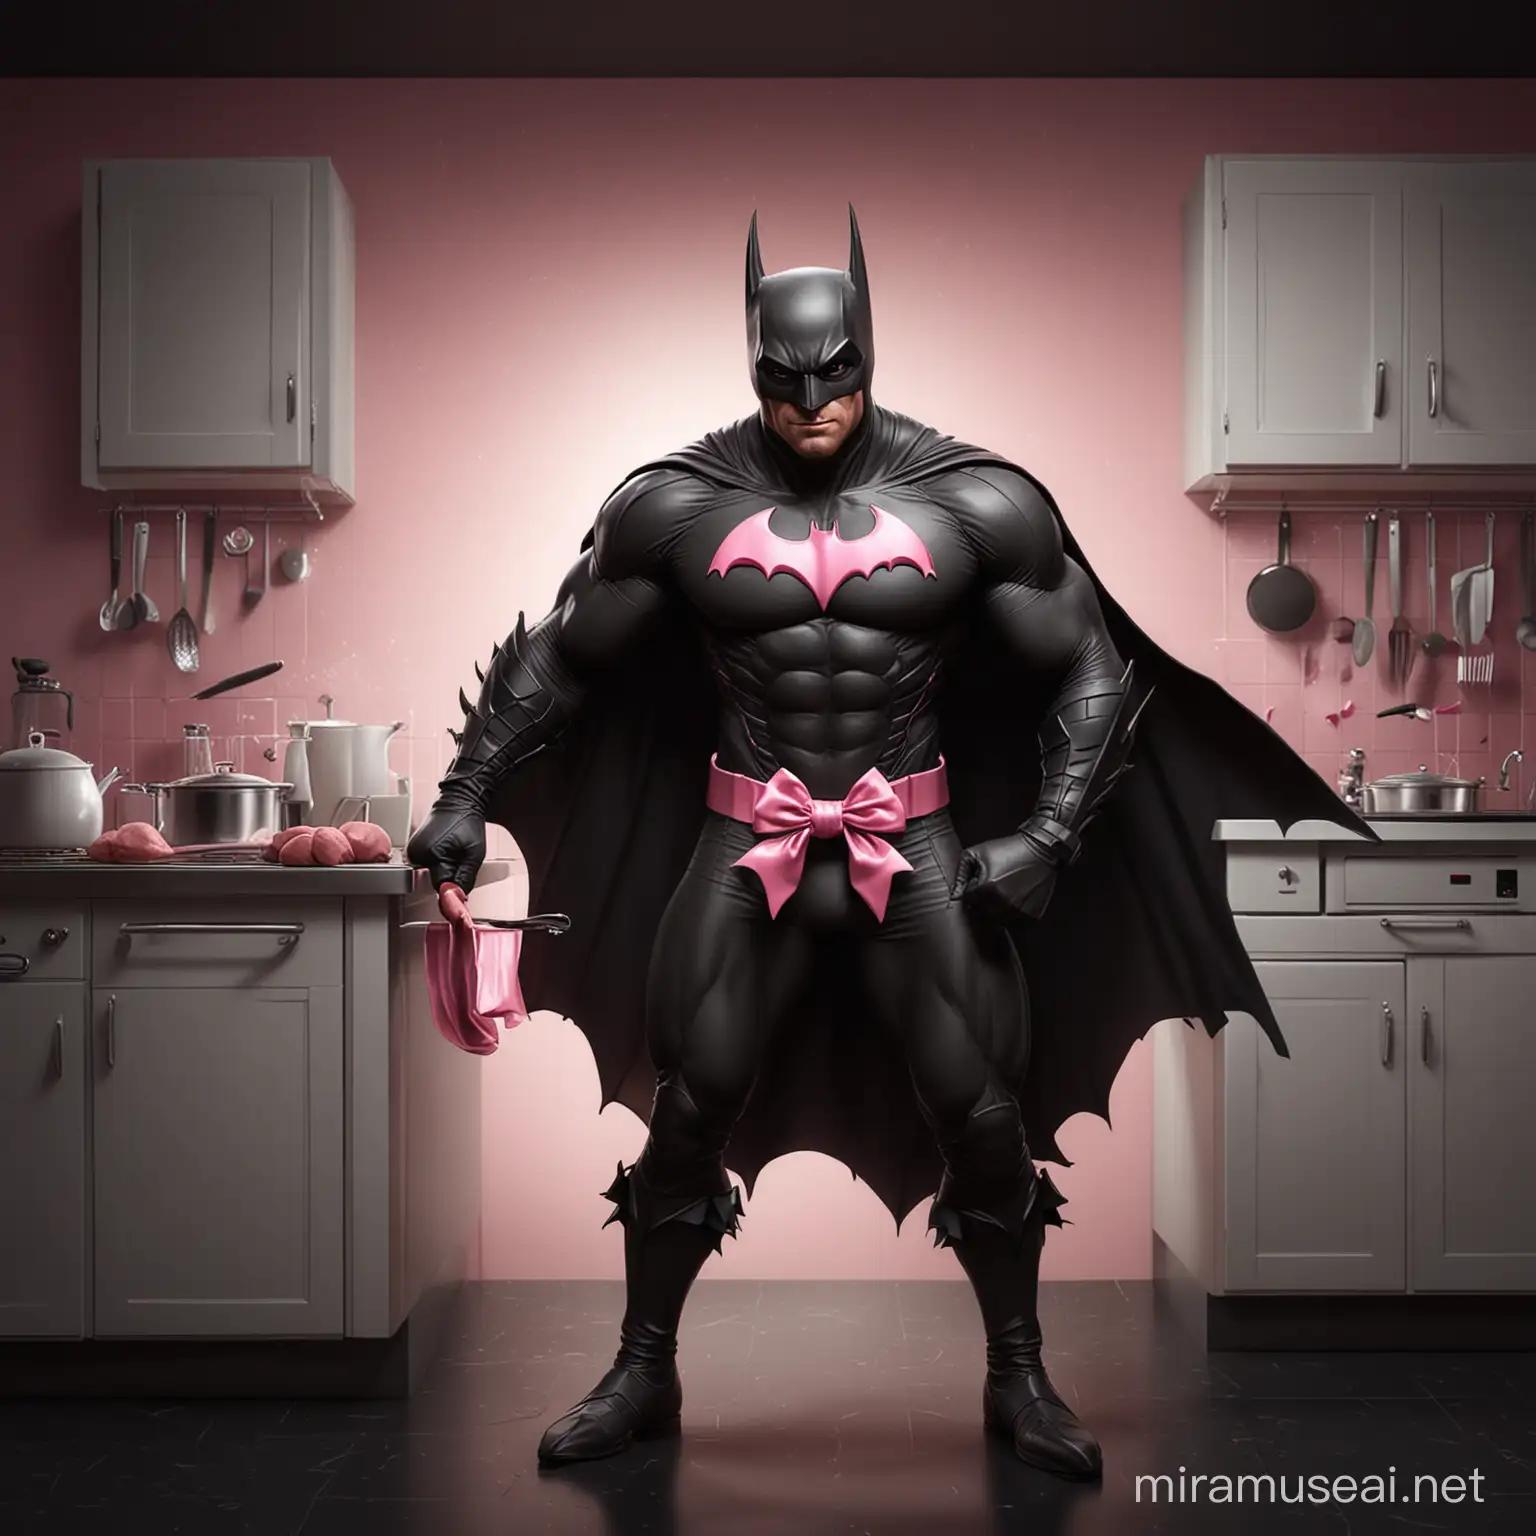 make a realistic bat man character with caricature art style, cooking, unique pose, with a coquette vibe , fierce expression, , high contrast, full body, in a kitchen cooking with a pink bow make it cute and with a black background
BAT MAN MAN 
